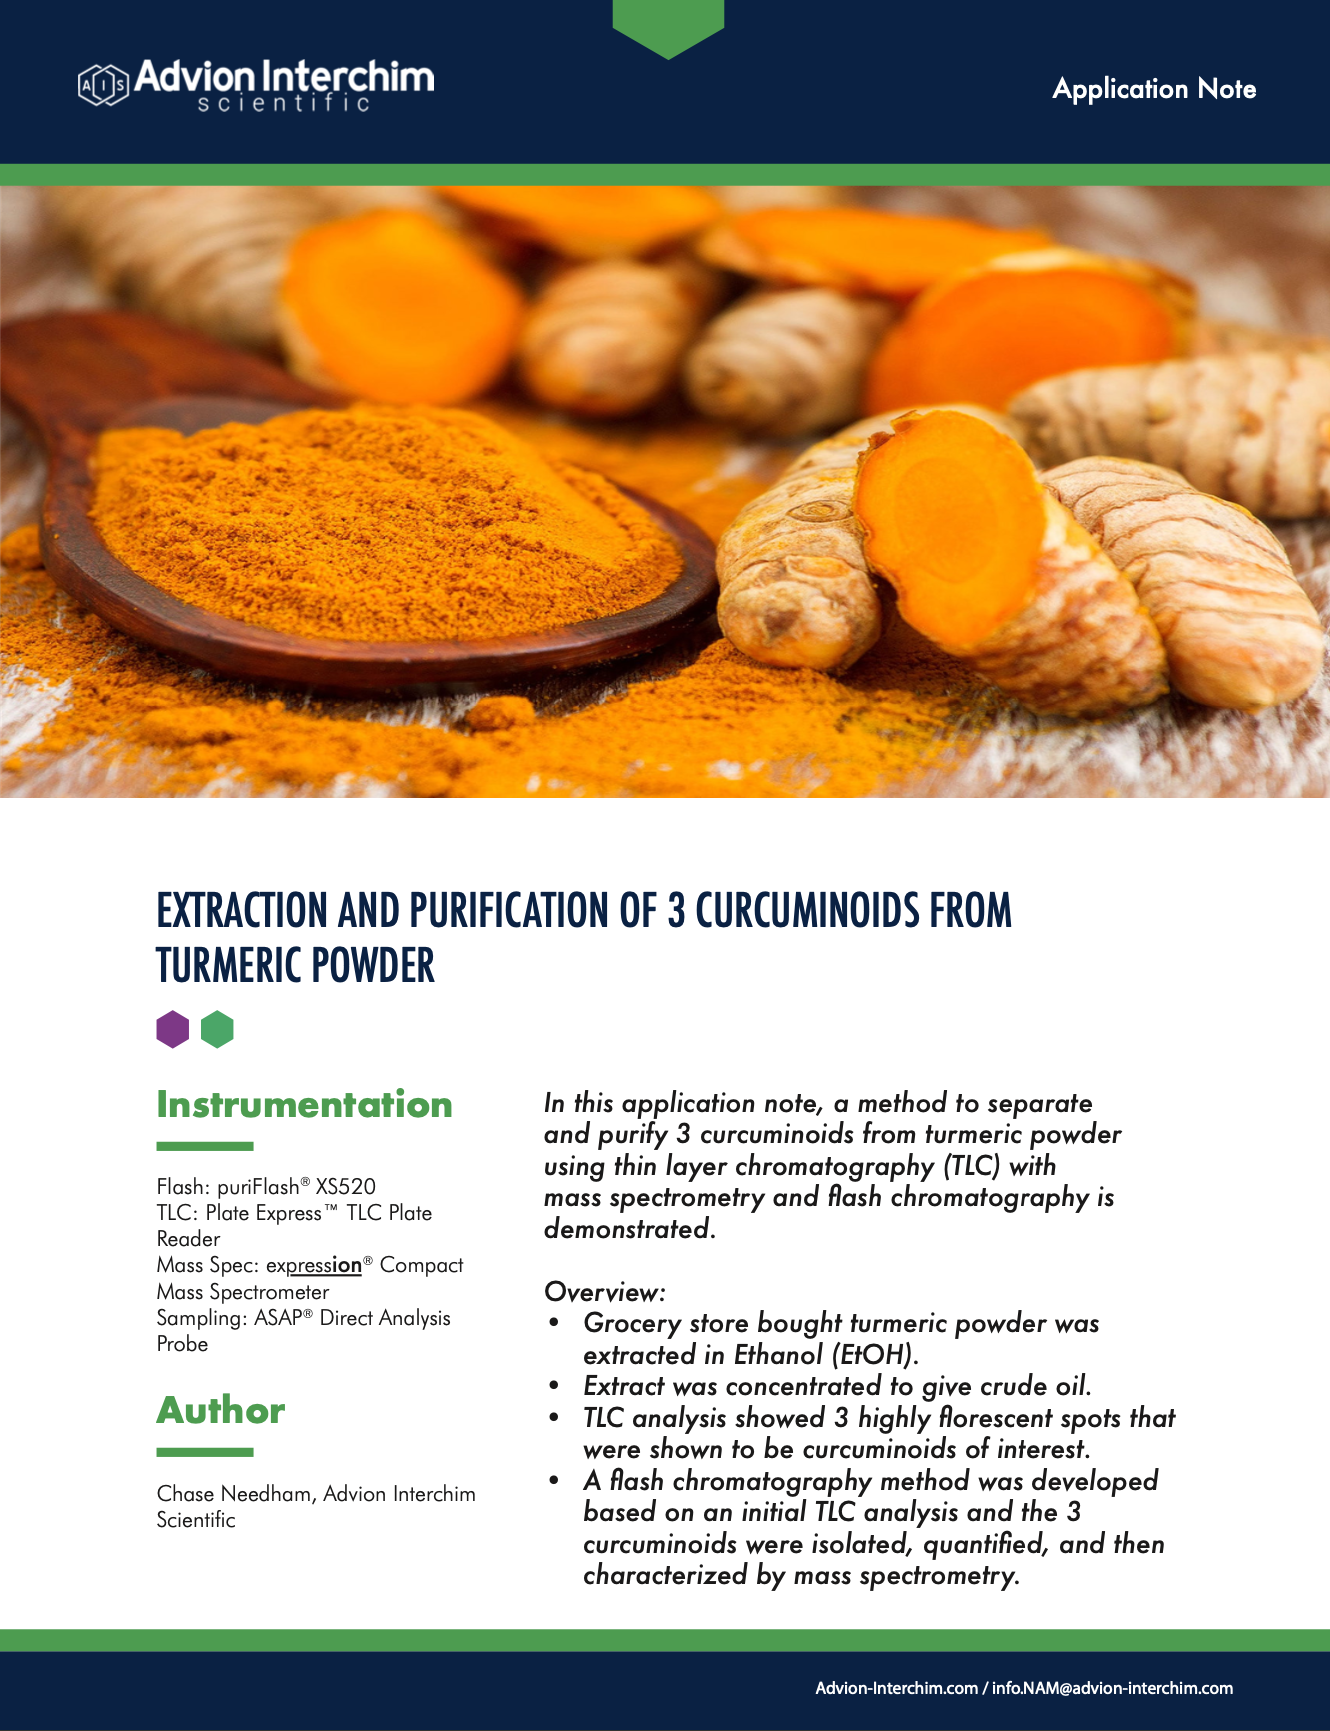 Extraction and Purification of 3 Curcuminoids from Turmeric Powder